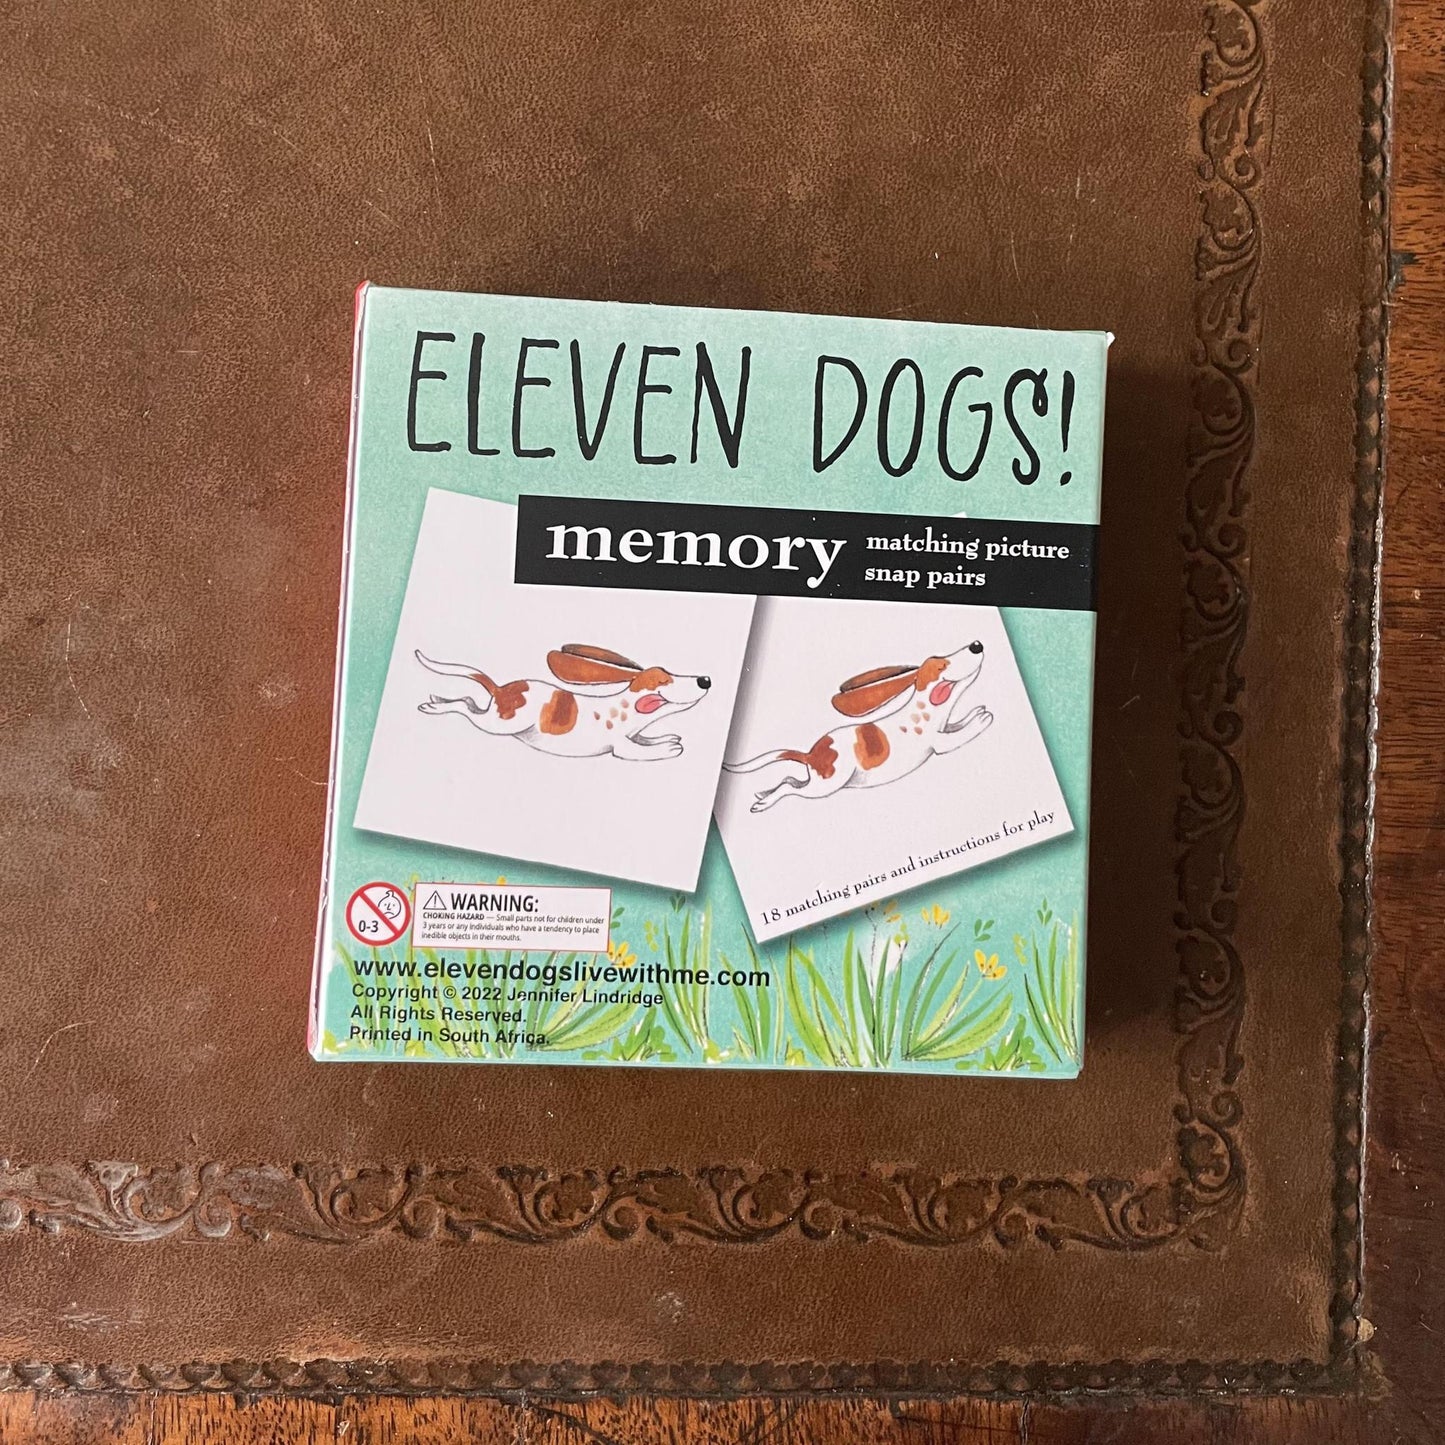 Eleven Dogs! Memory Matching Picture Snap Pairs